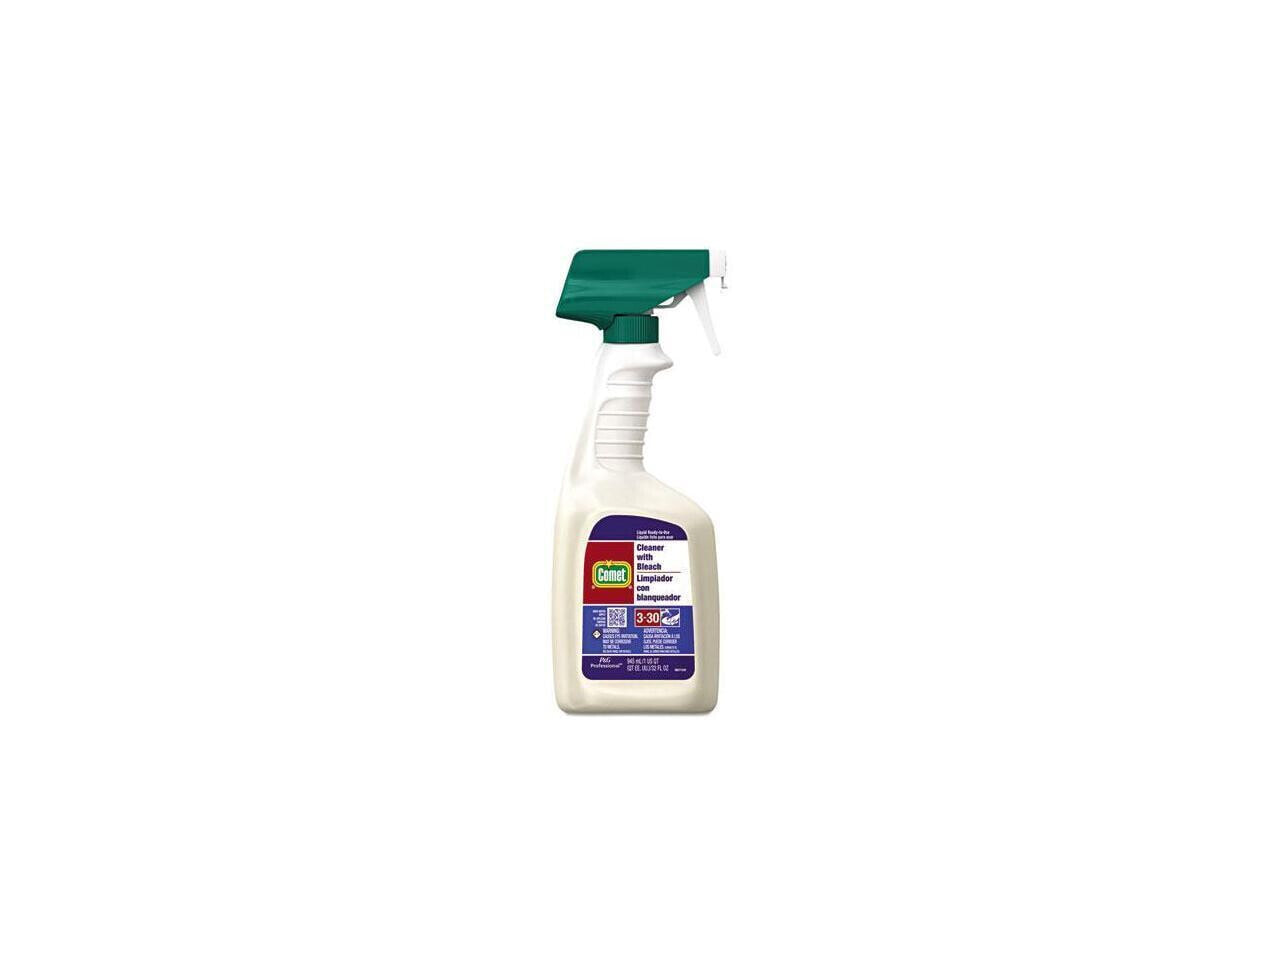 Procter & Gamble 02287 32 oz Bottle Comet Cleaner with Bleach - Case of 8